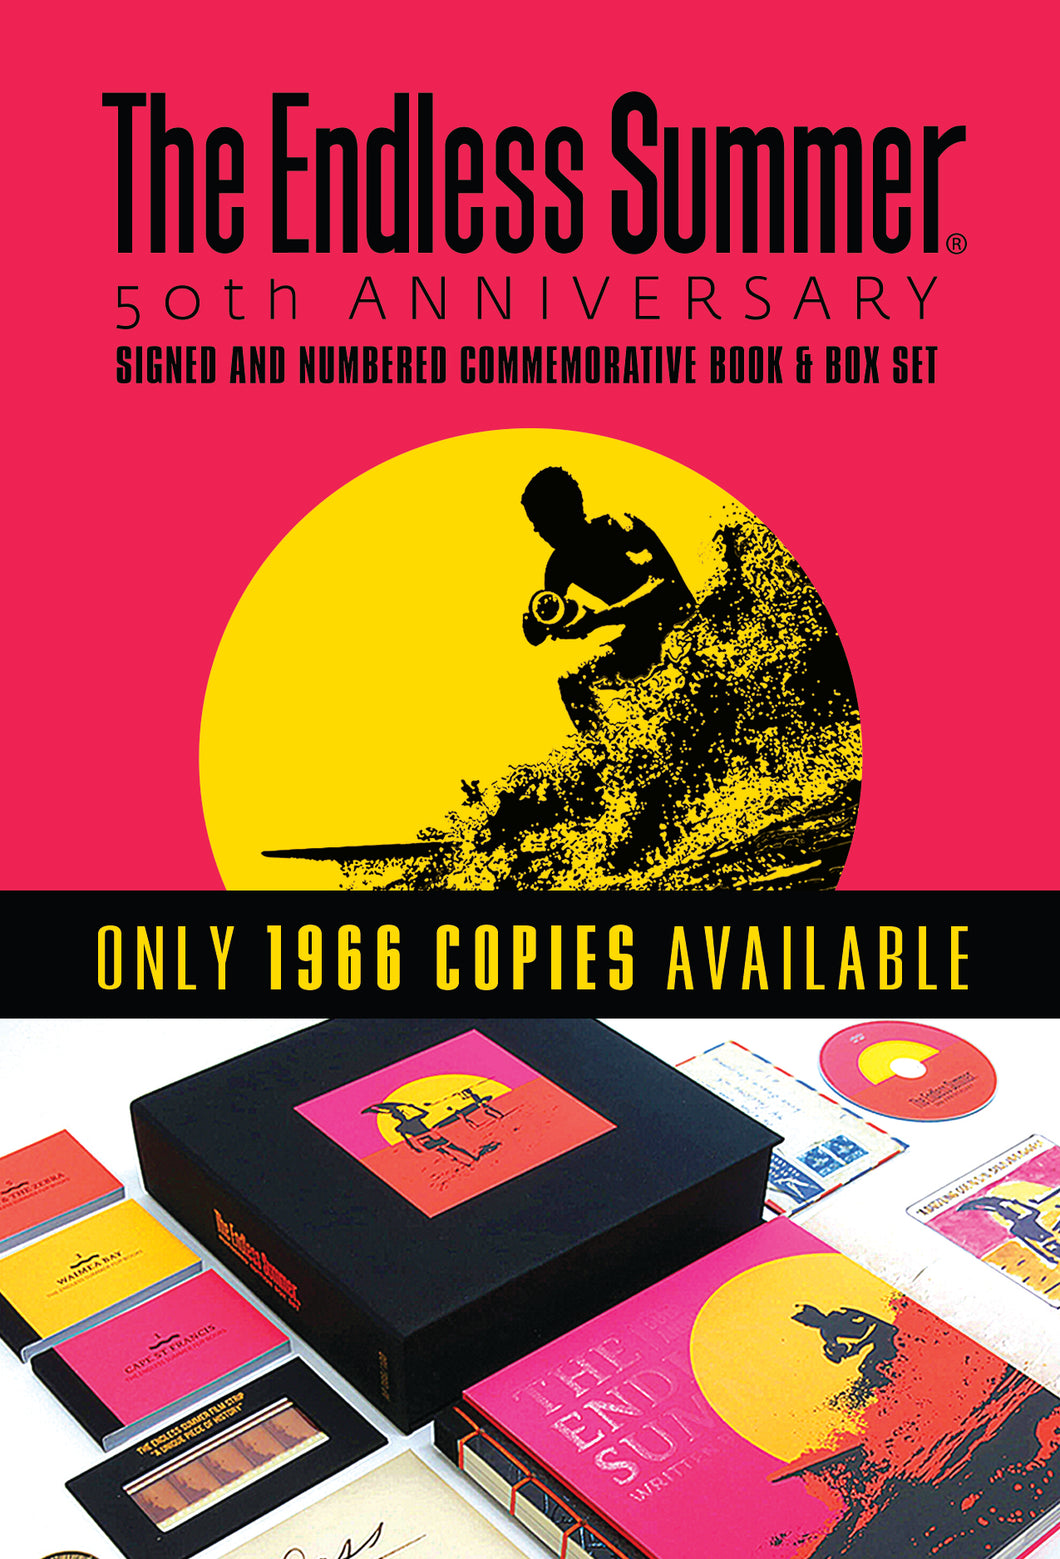 50th anniversary book, About